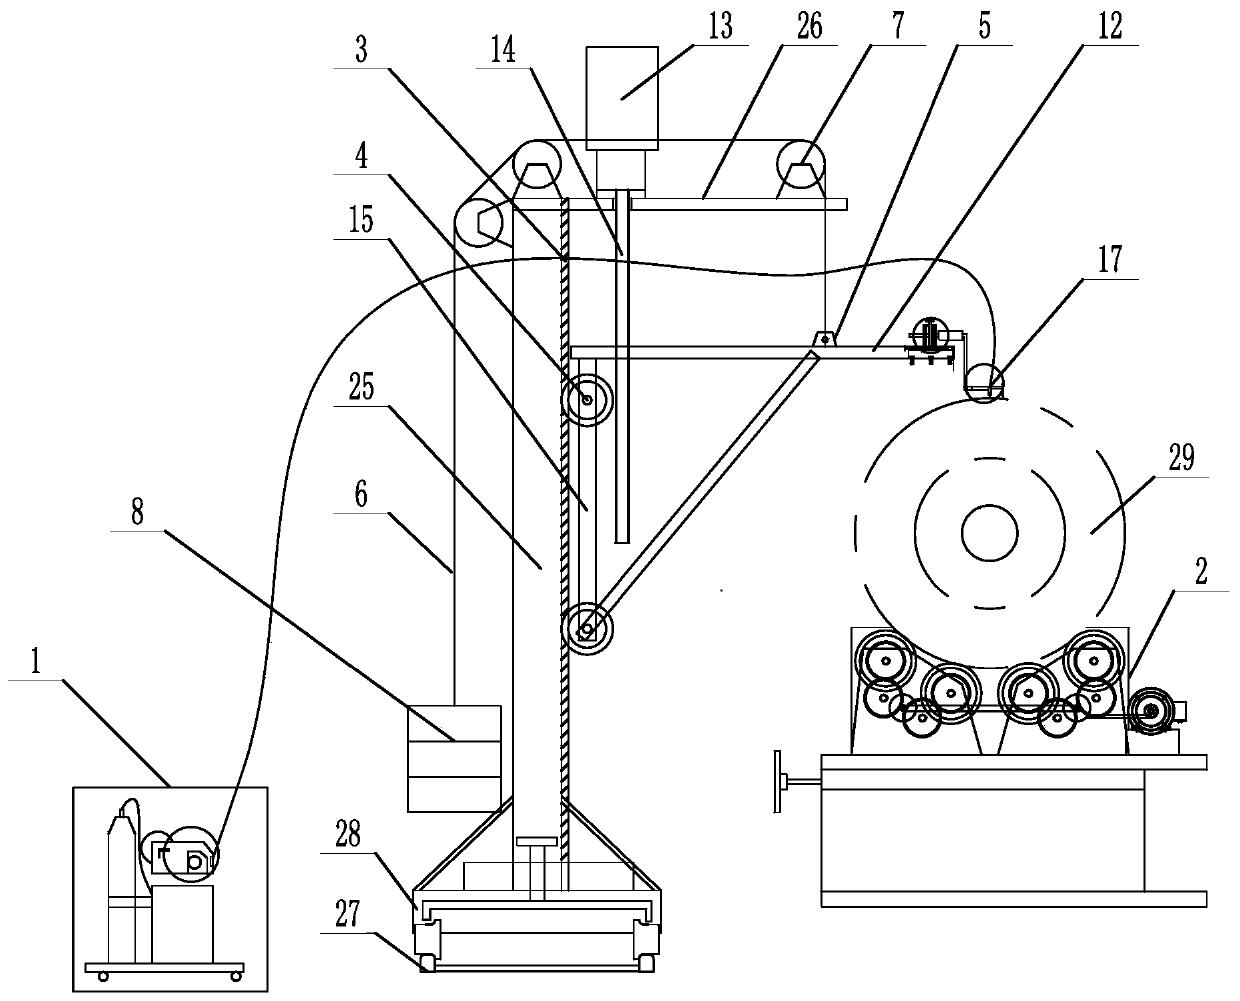 Longitudinal and circumferential seam welding device for large pressure container barrel